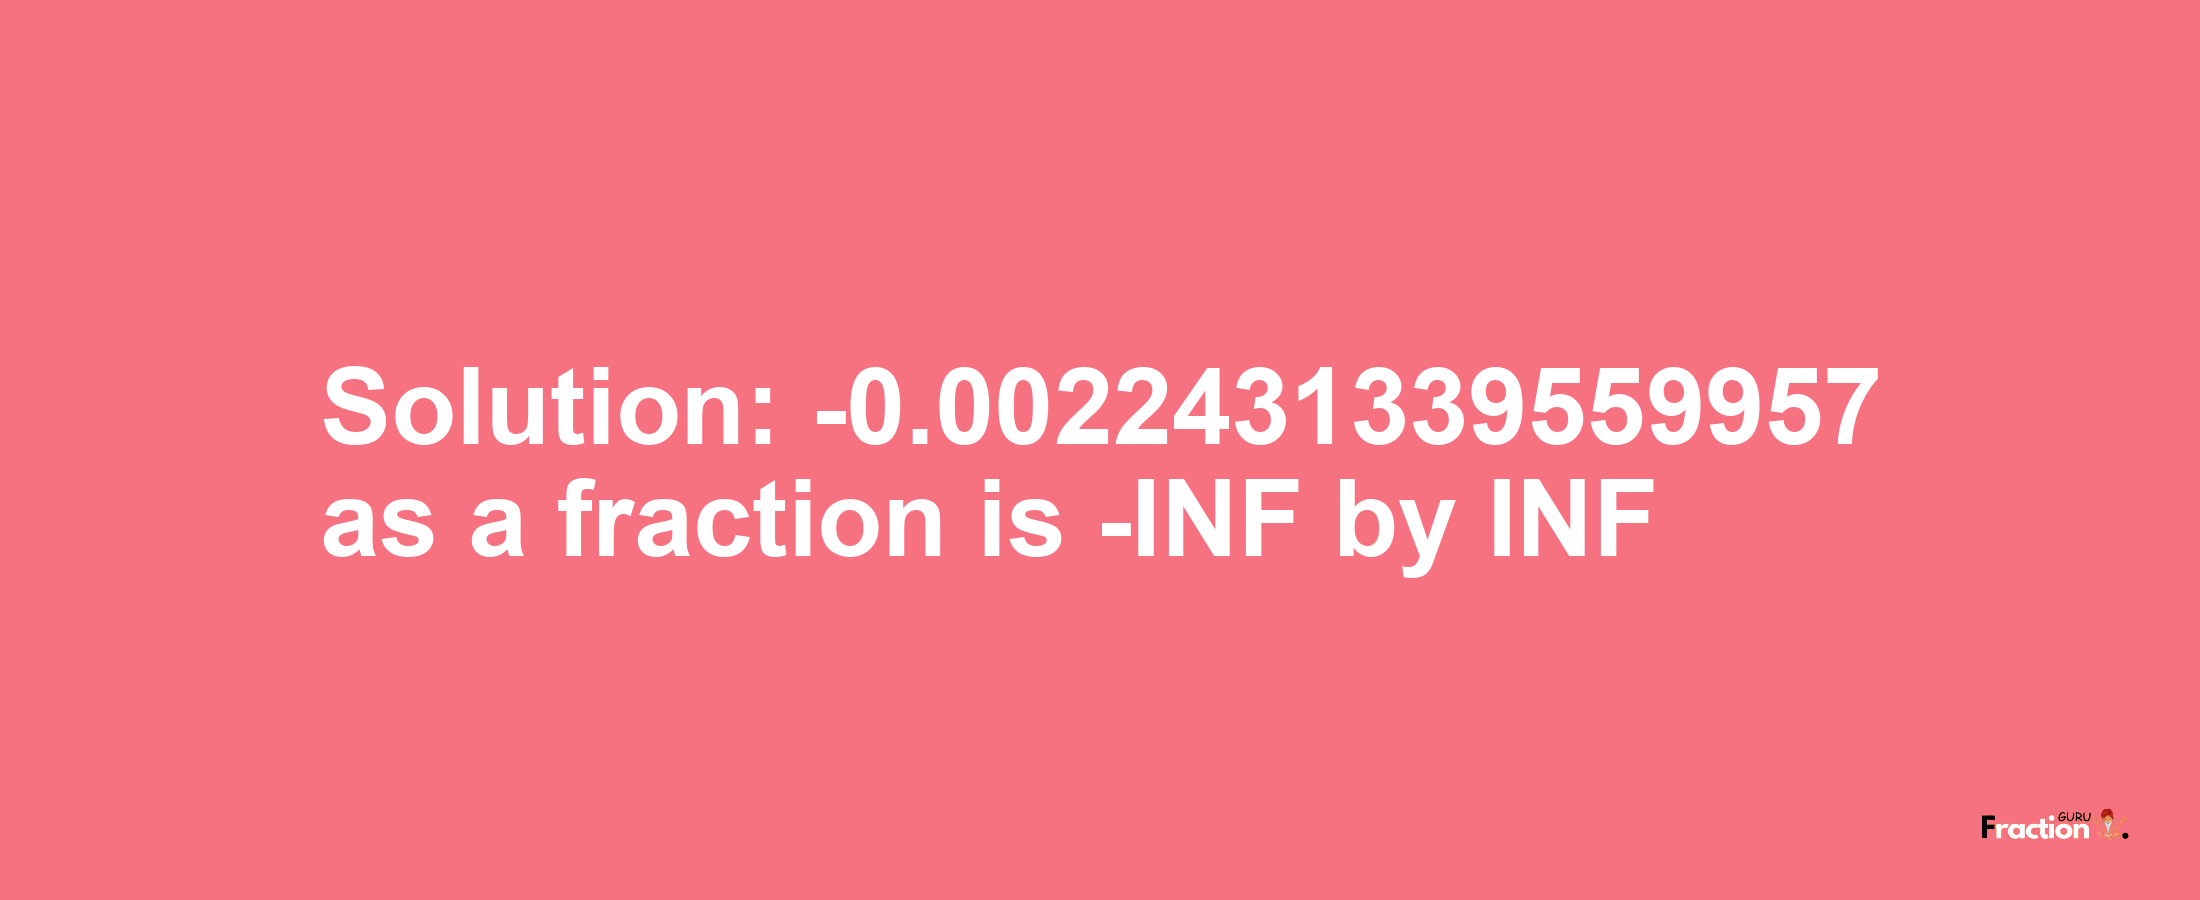 Solution:-0.0022431339559957 as a fraction is -INF/INF